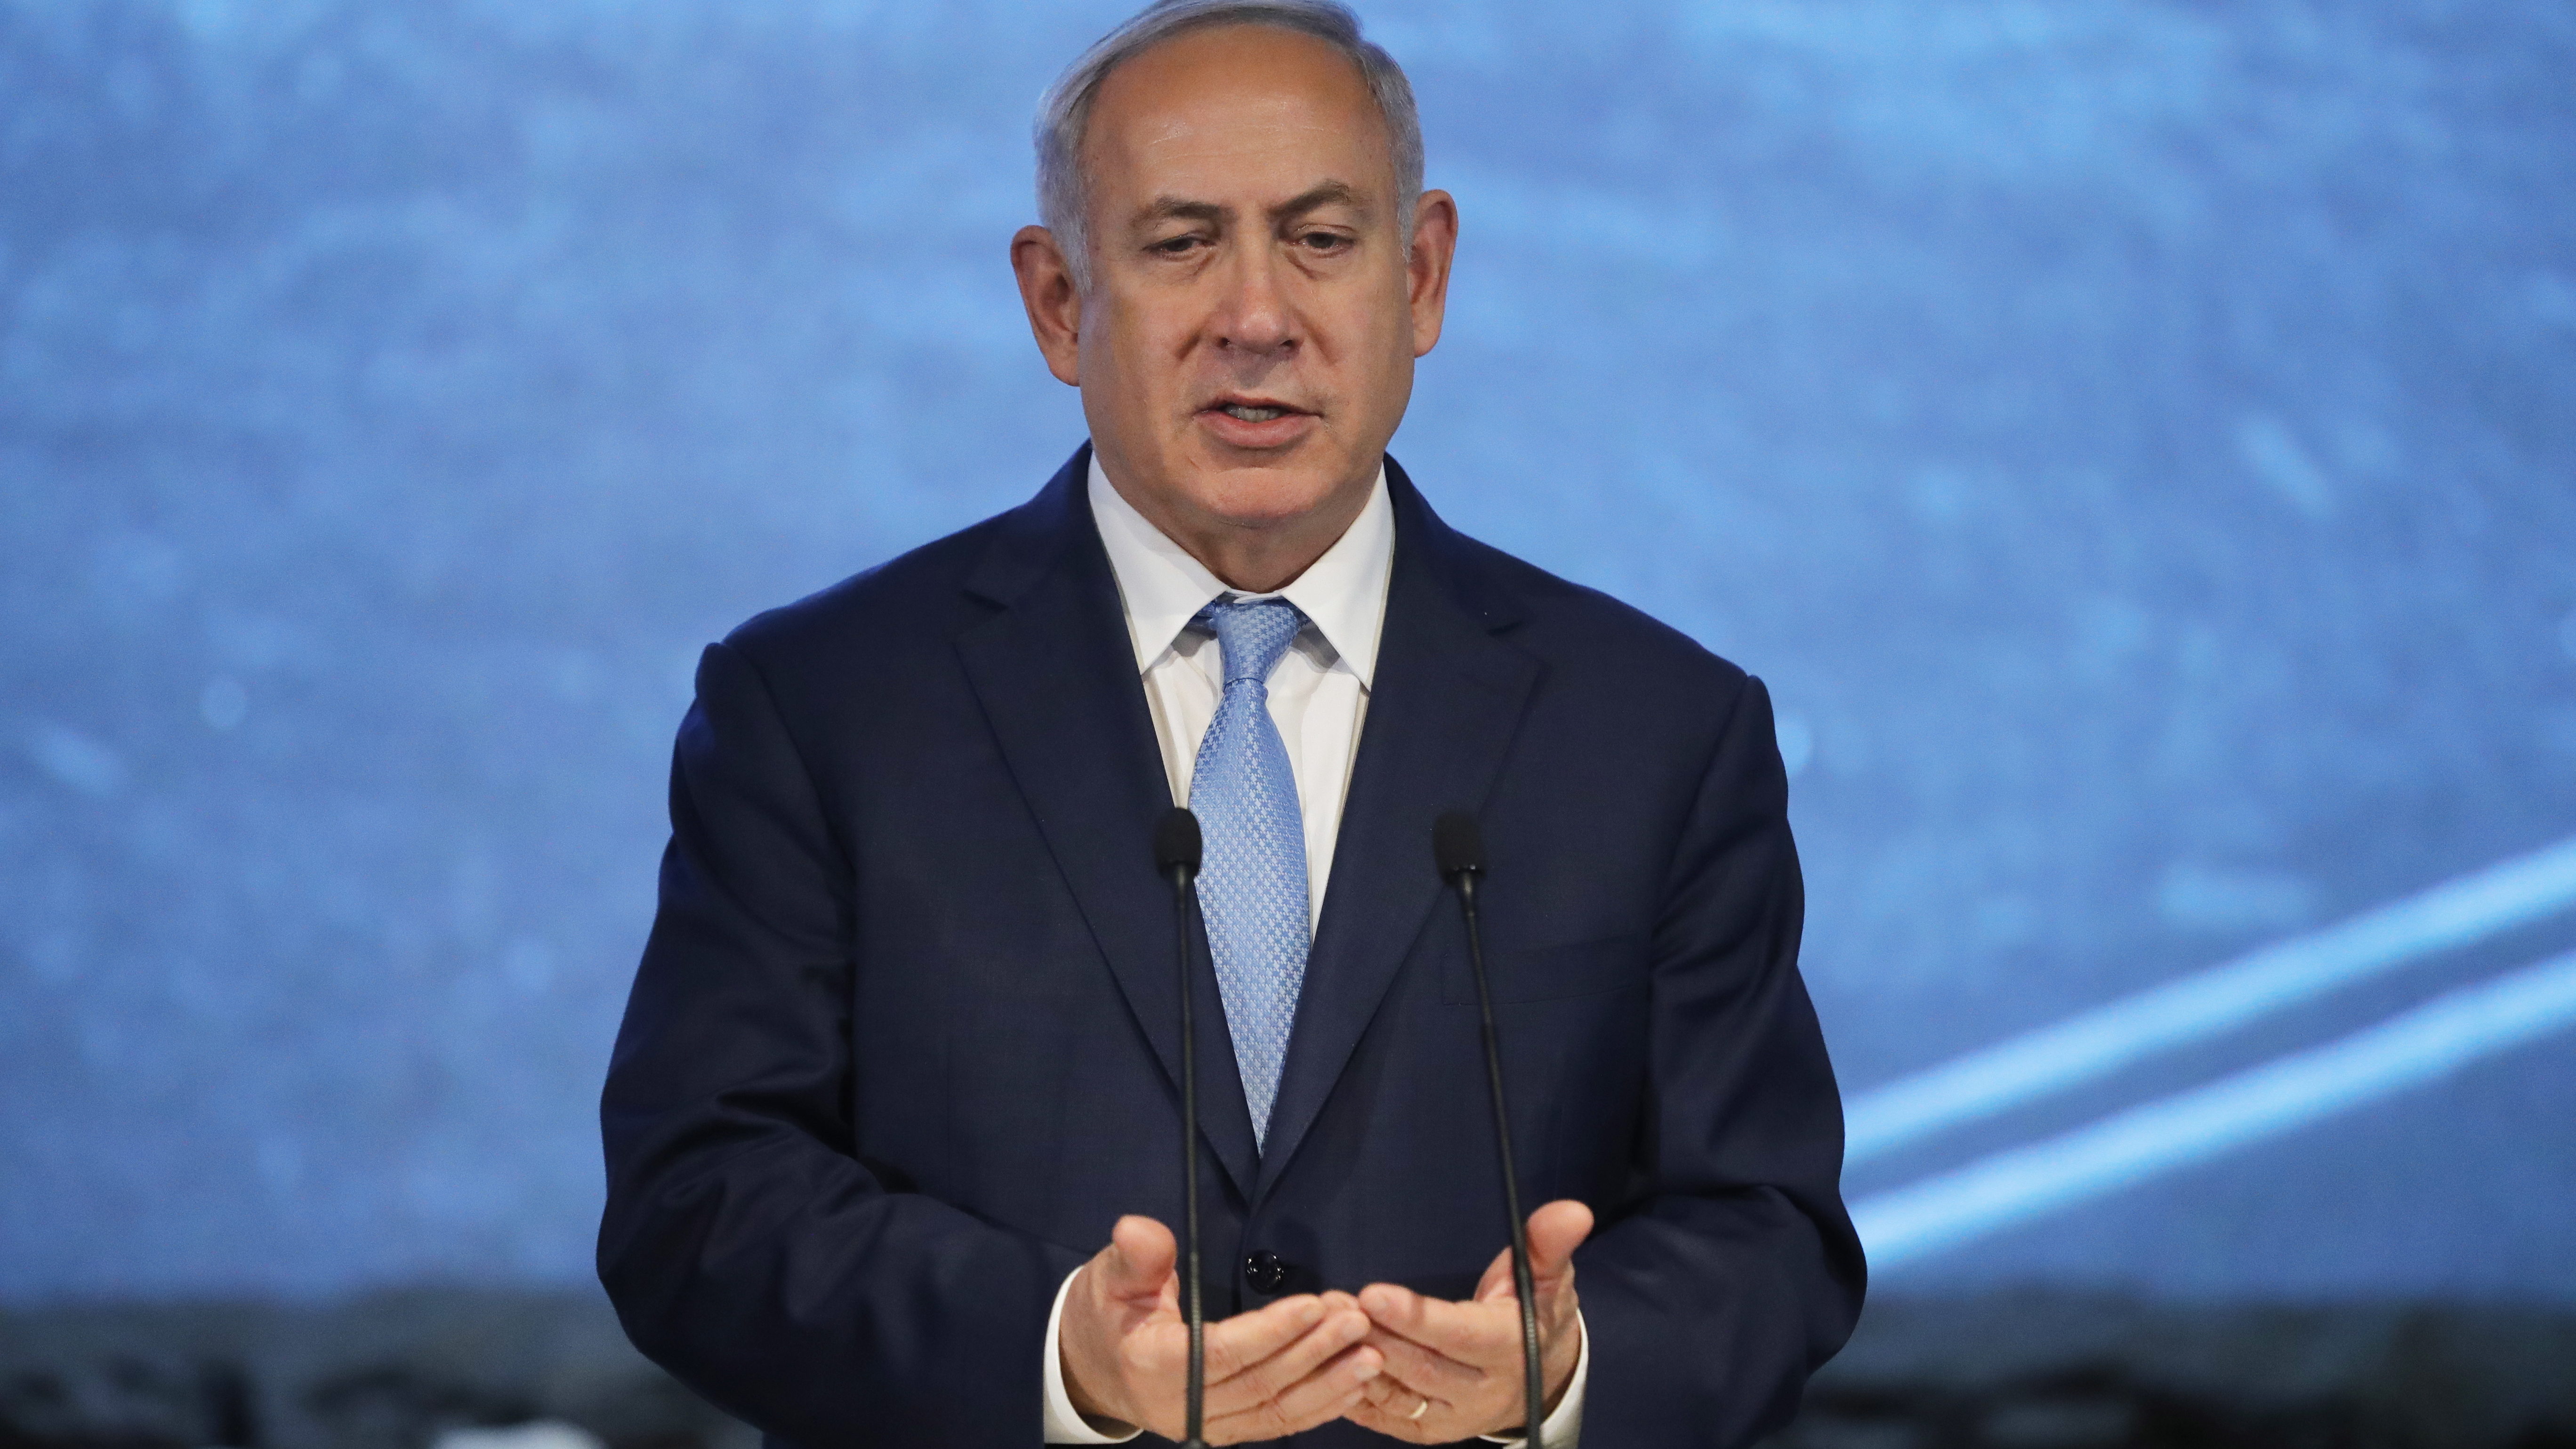 Netanyahu: We Will Not Allow Iran to Obtain a Nuclear Weapon